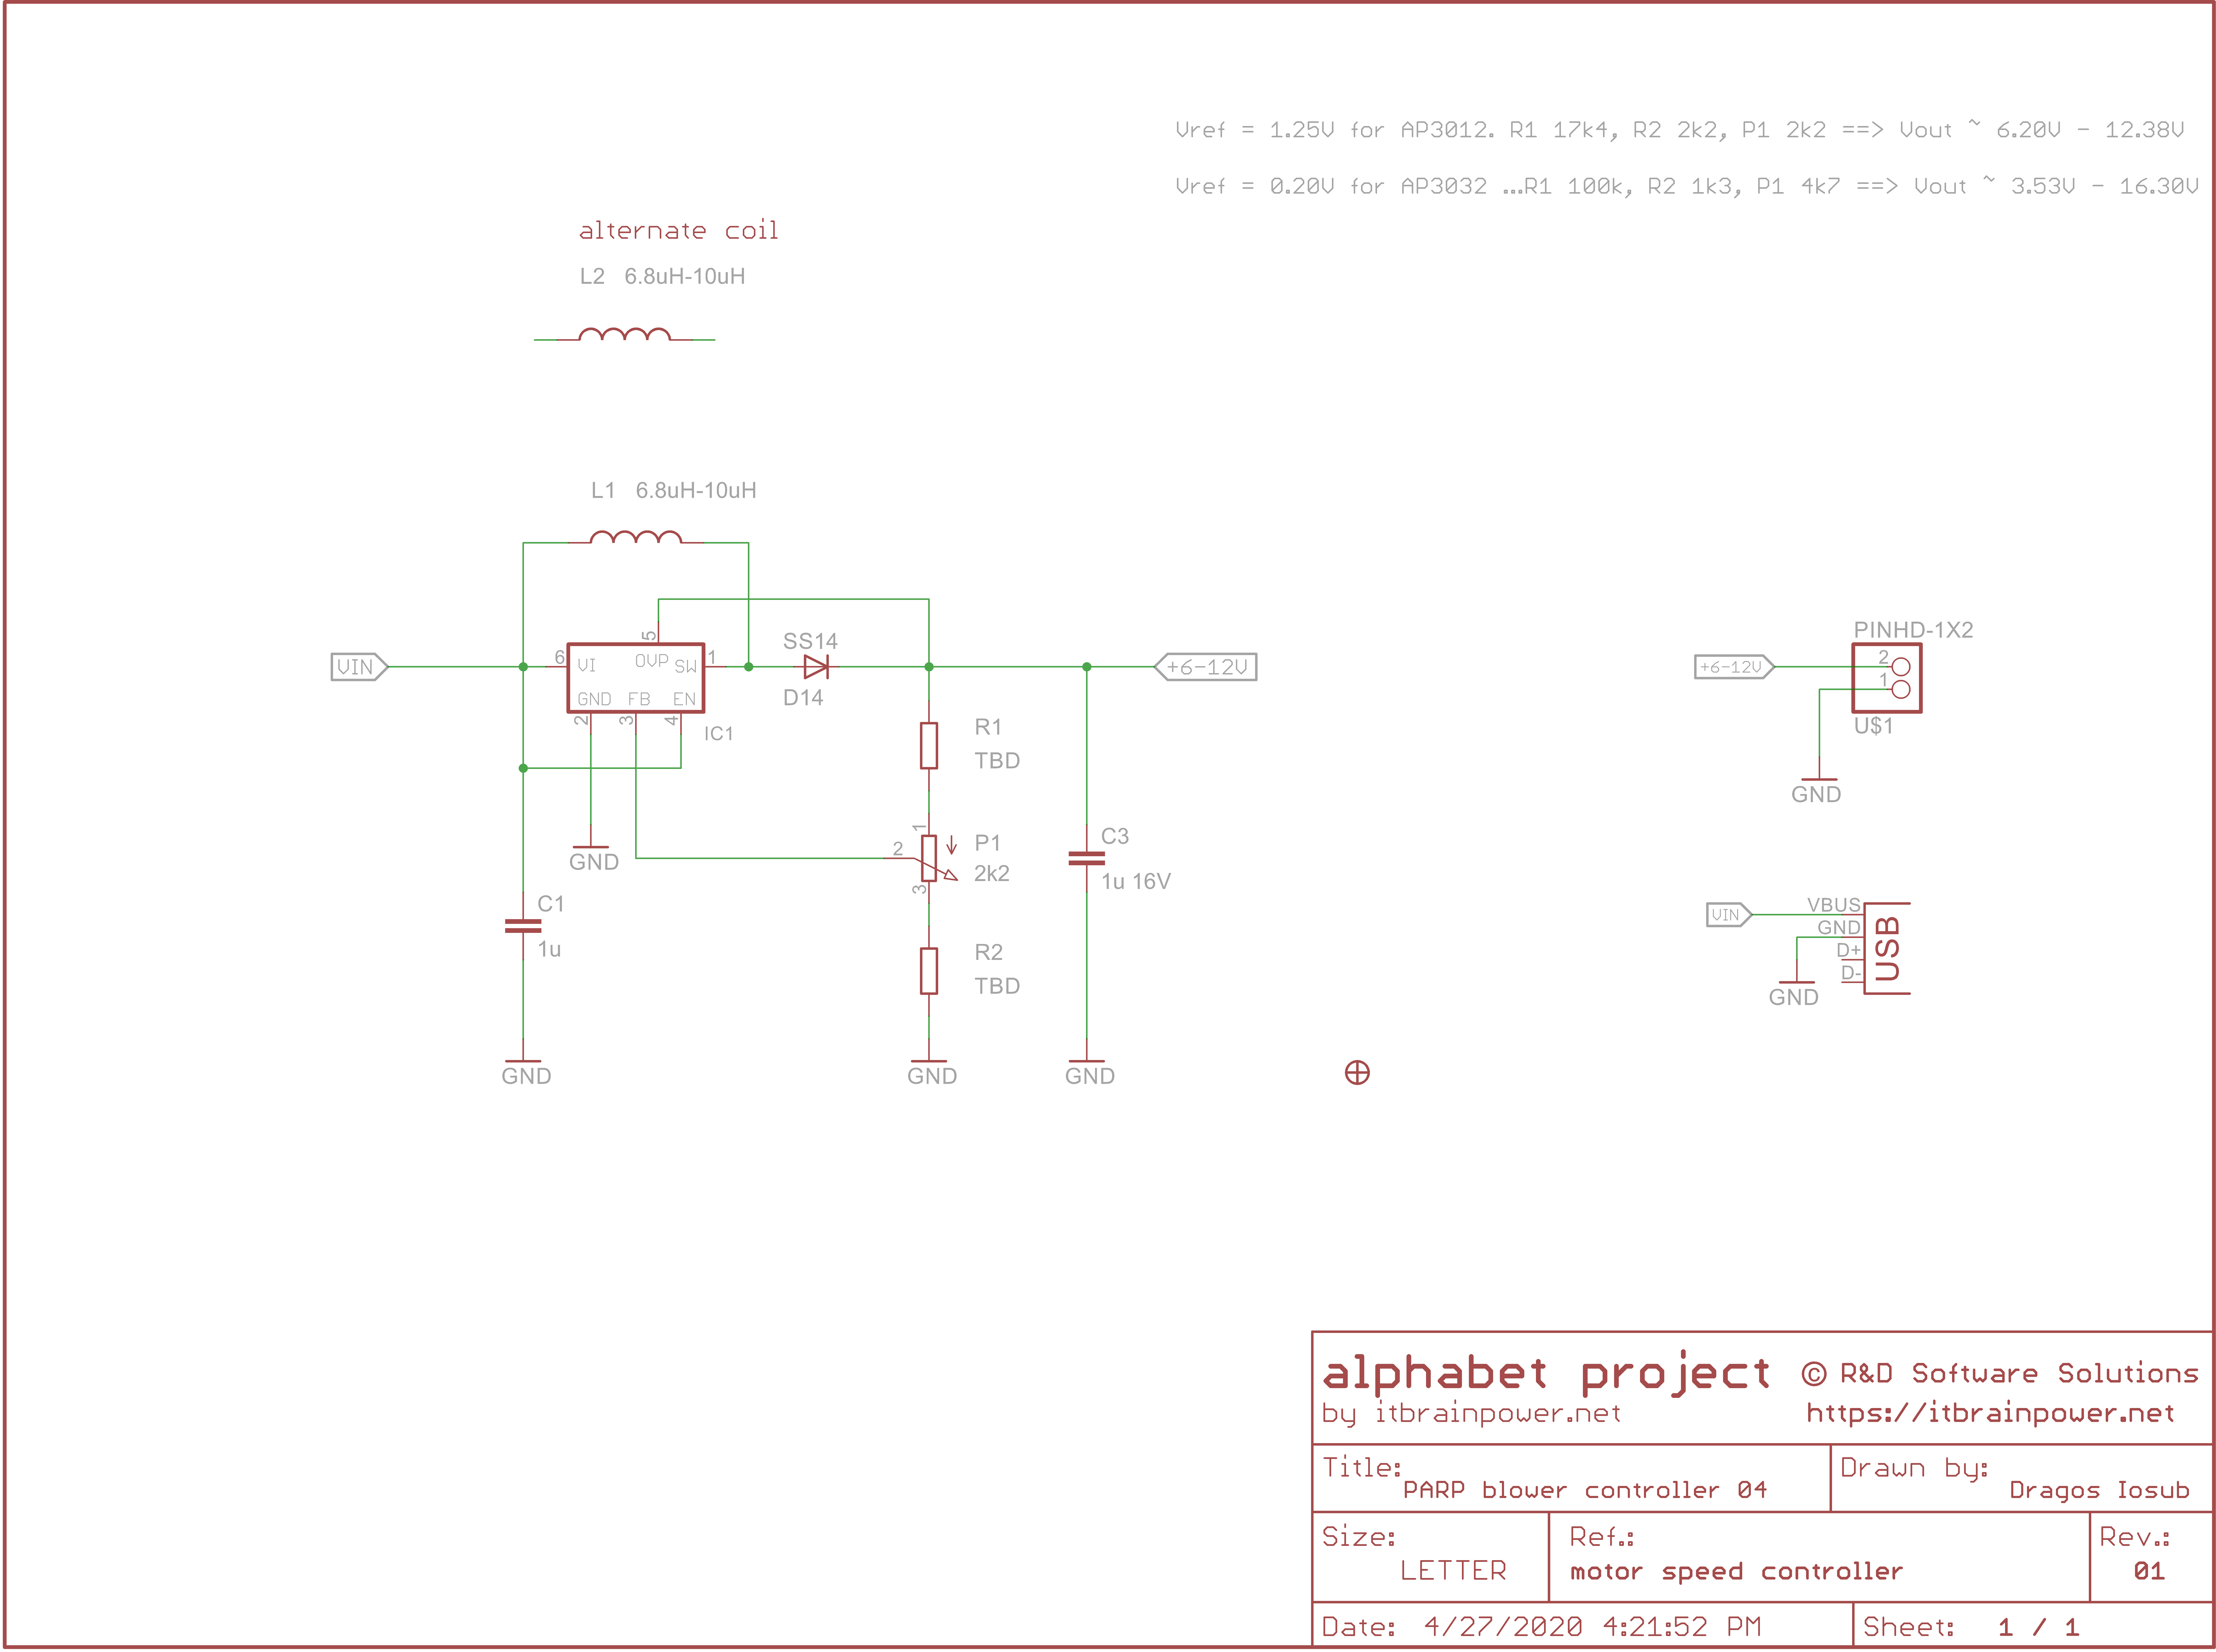 blower controller for covid19 PAPR, electrical schema v 0.2